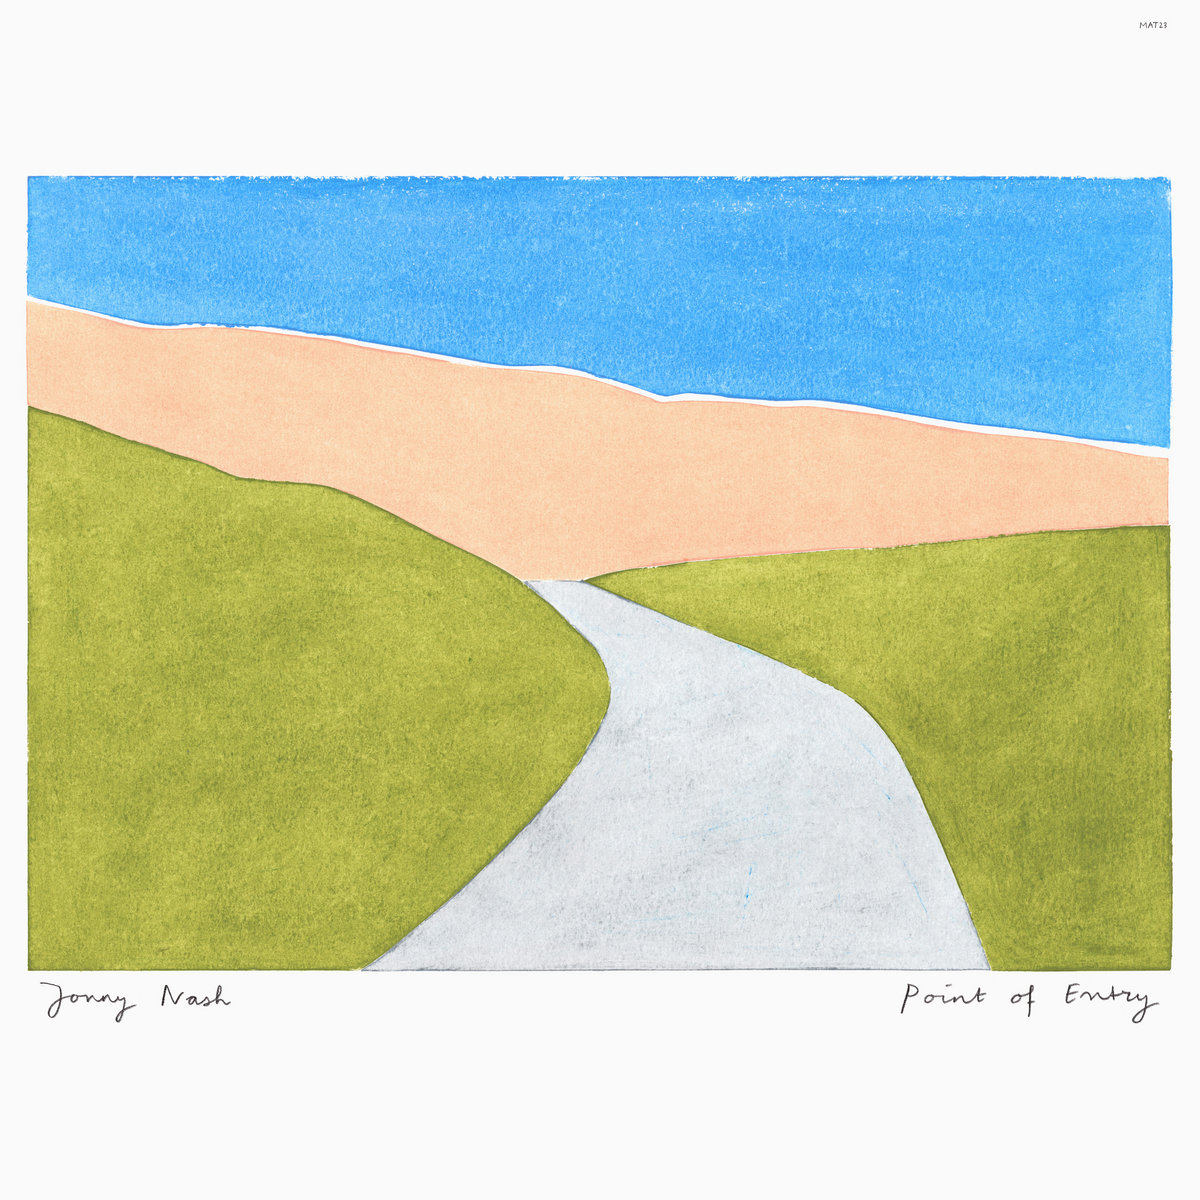 This.... on heavy rotation. One of the best albums of 2023 so far.
Jonny Nash - Point Of Entry
(bandcamp link in comments)
#ambient #folk #ambientfolk #NowPlaying #JonnyNash
open.spotify.com/album/7aDfAxYI…